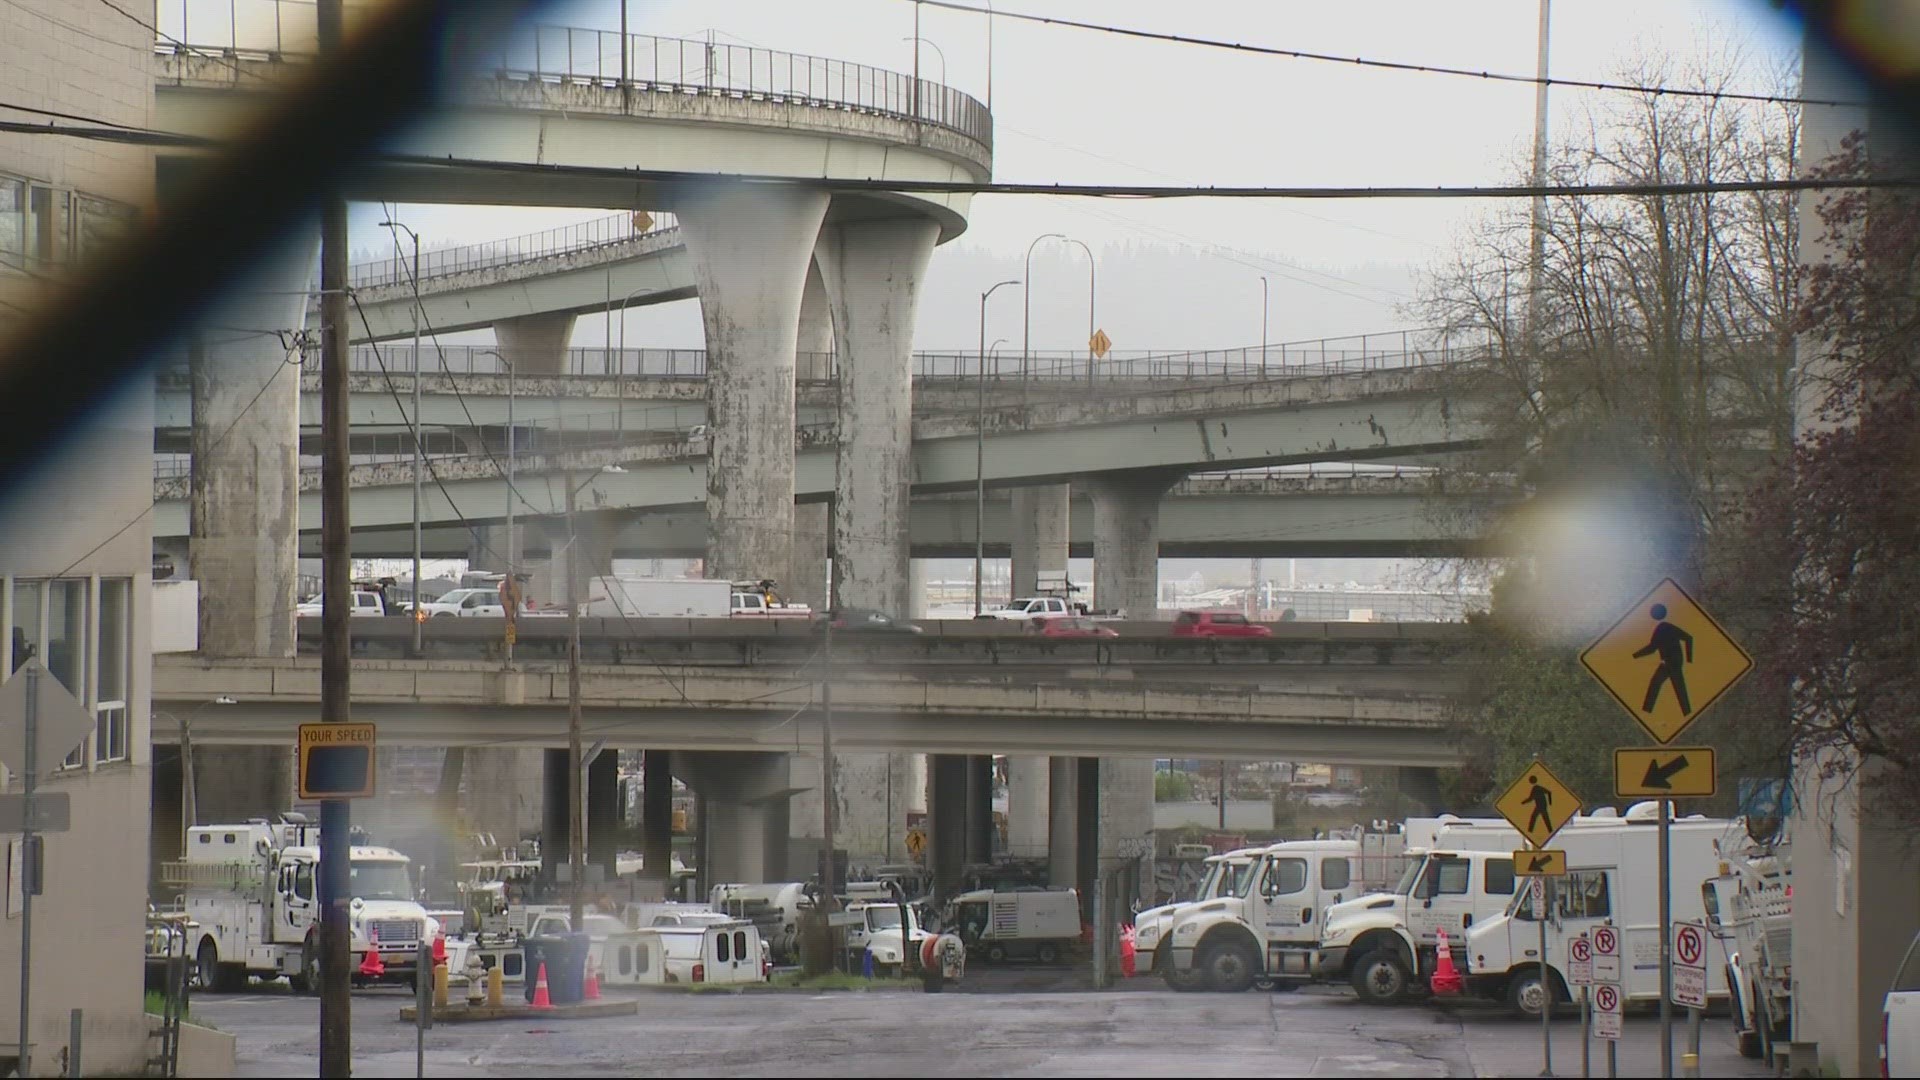 ODOT says drivers alerted them to the problem Thursday afternoon about bumps in the road and concrete falling into PBOT's yard below.